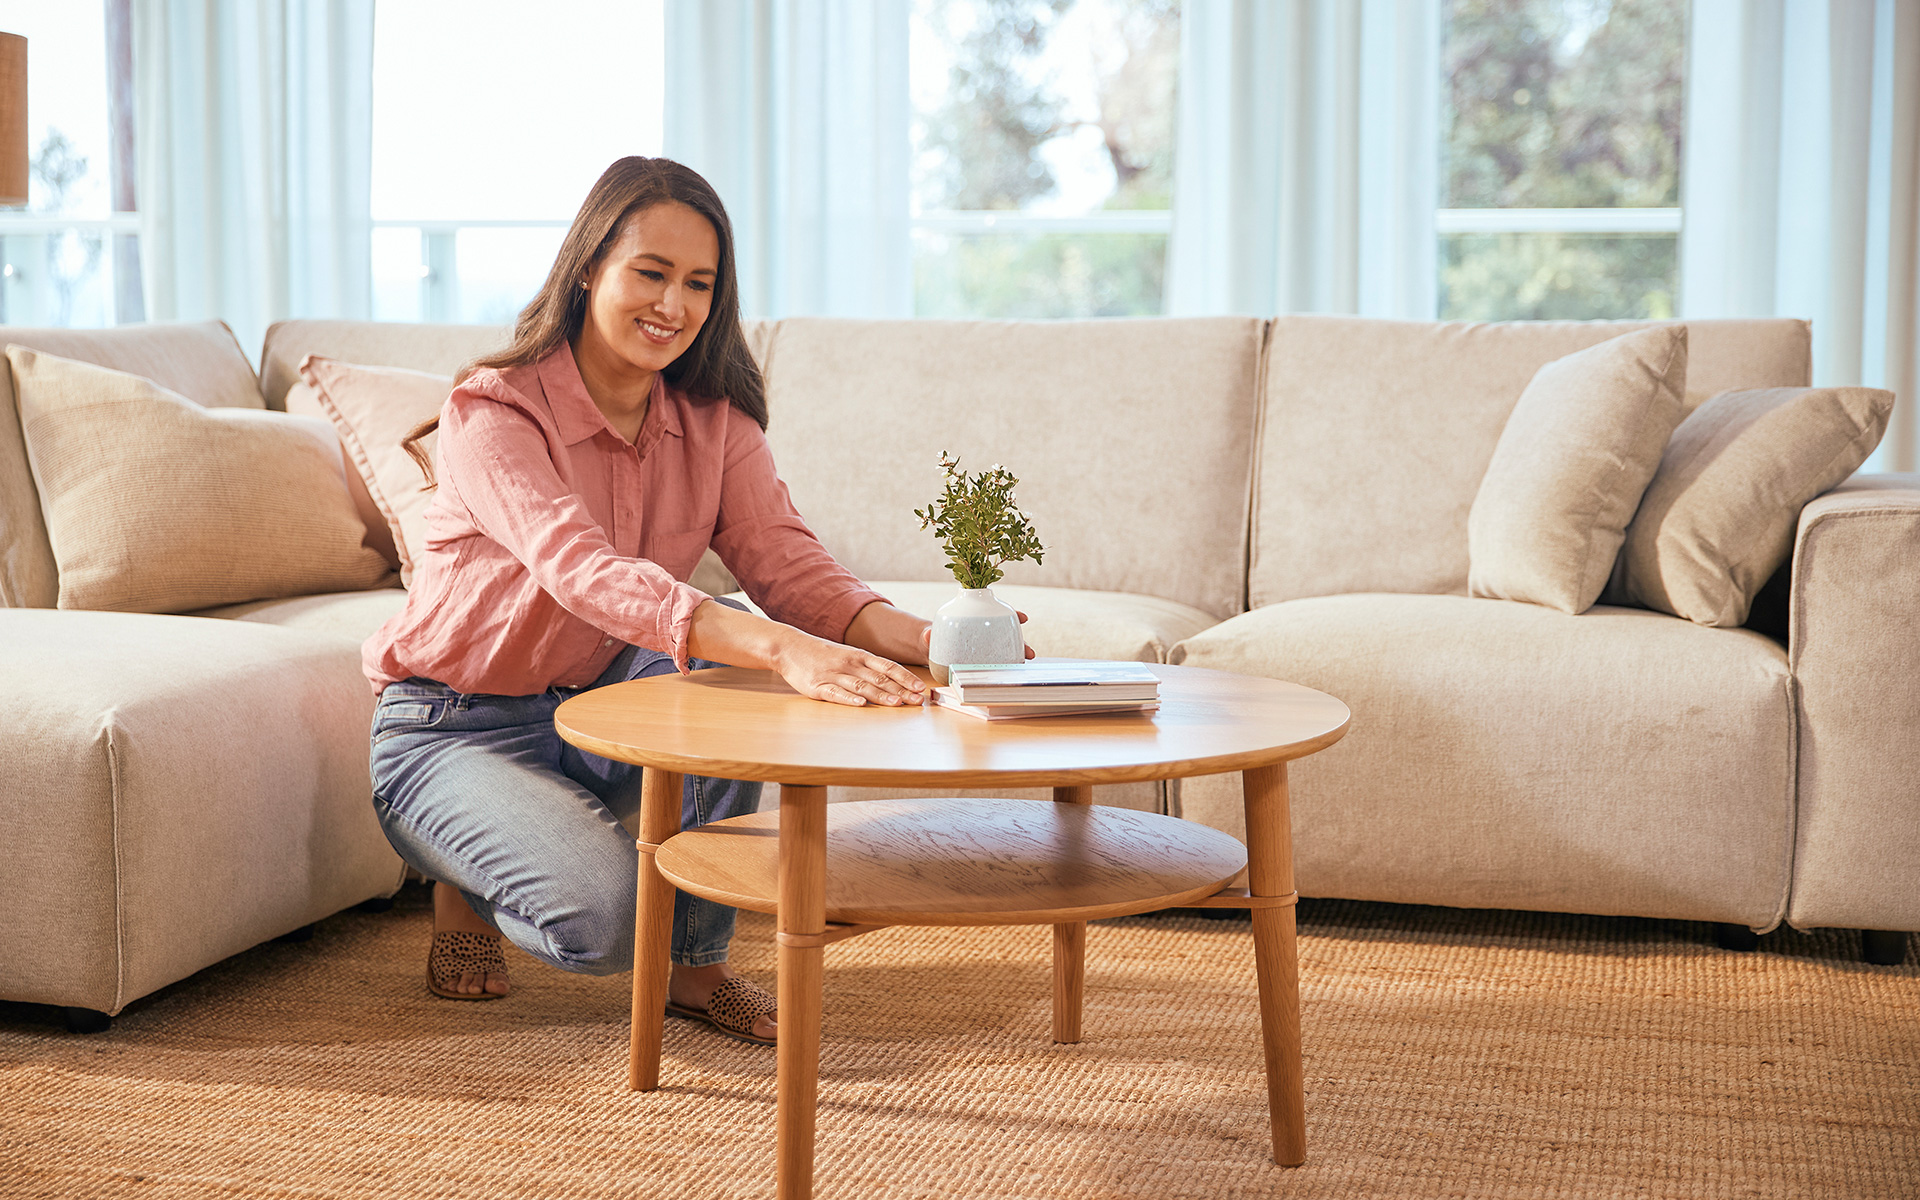 A woman smiles as she arranges a book and vase on her Scandi coffee table from Koala